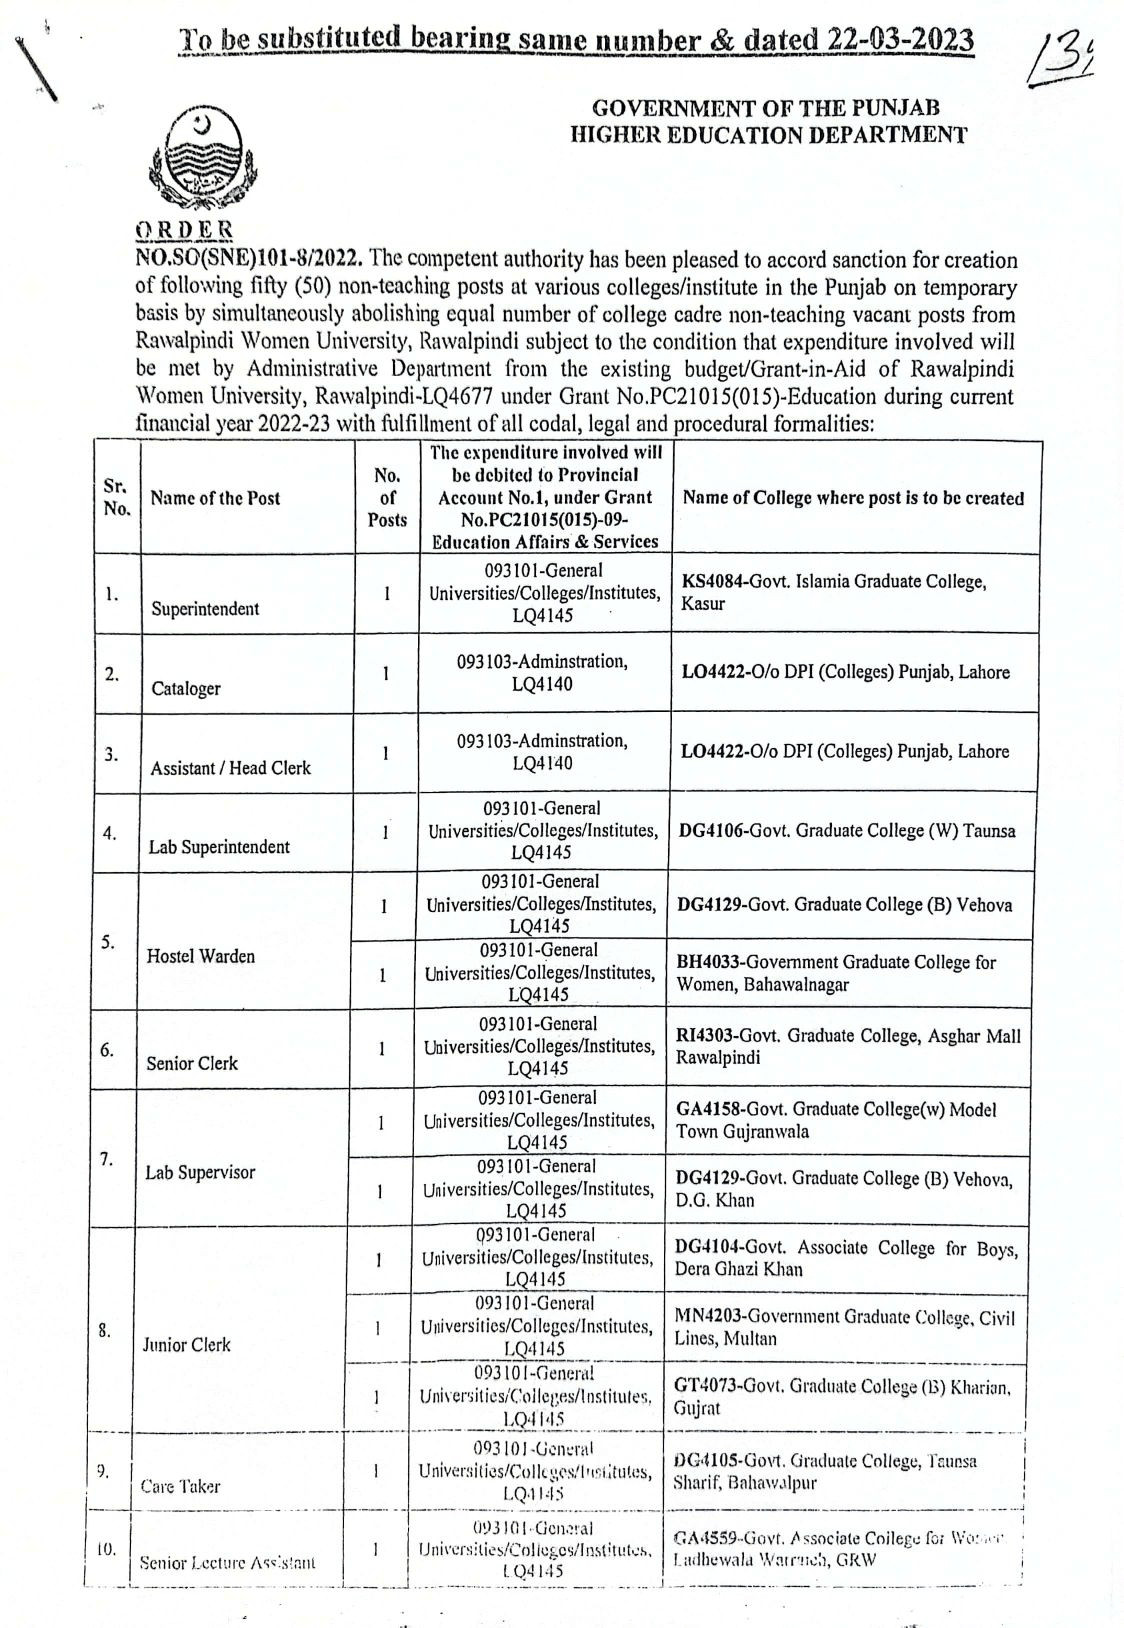 Notification of Creation of New Non-Teaching Posts in Colleges of Punjab